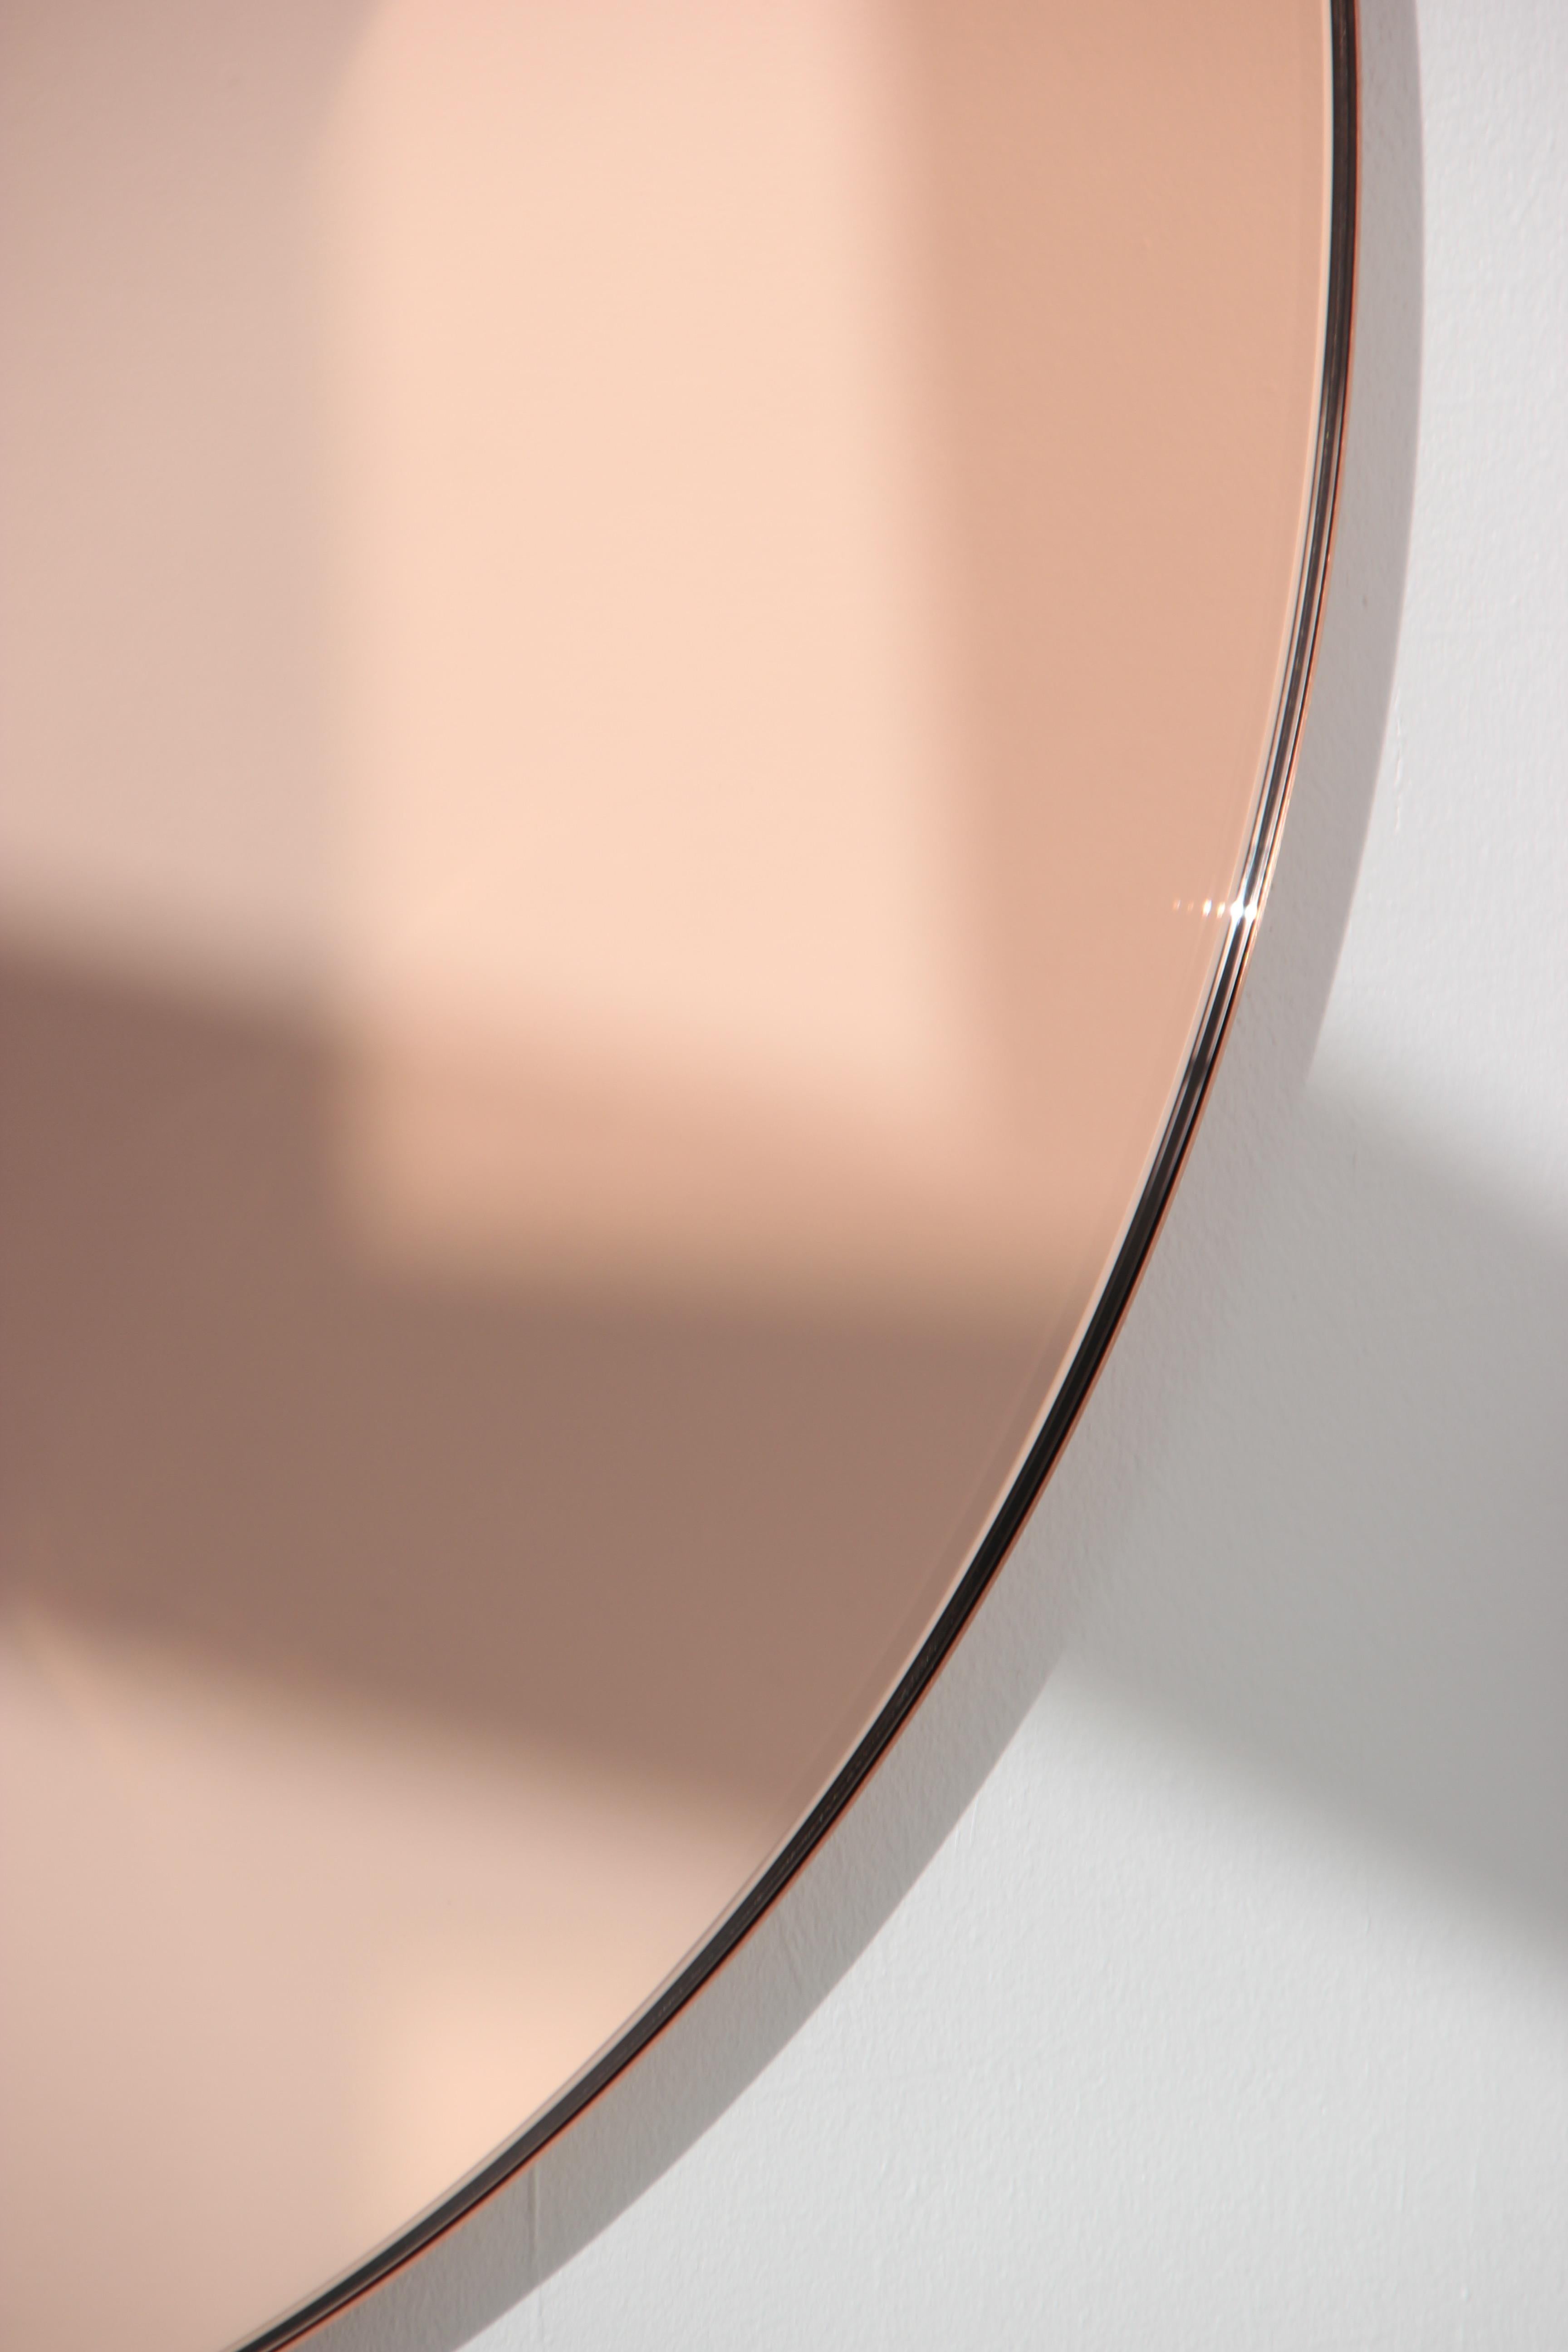 British Orbis Rose Gold Tinted Round Minimalist Mirror with Copper Frame, Small For Sale